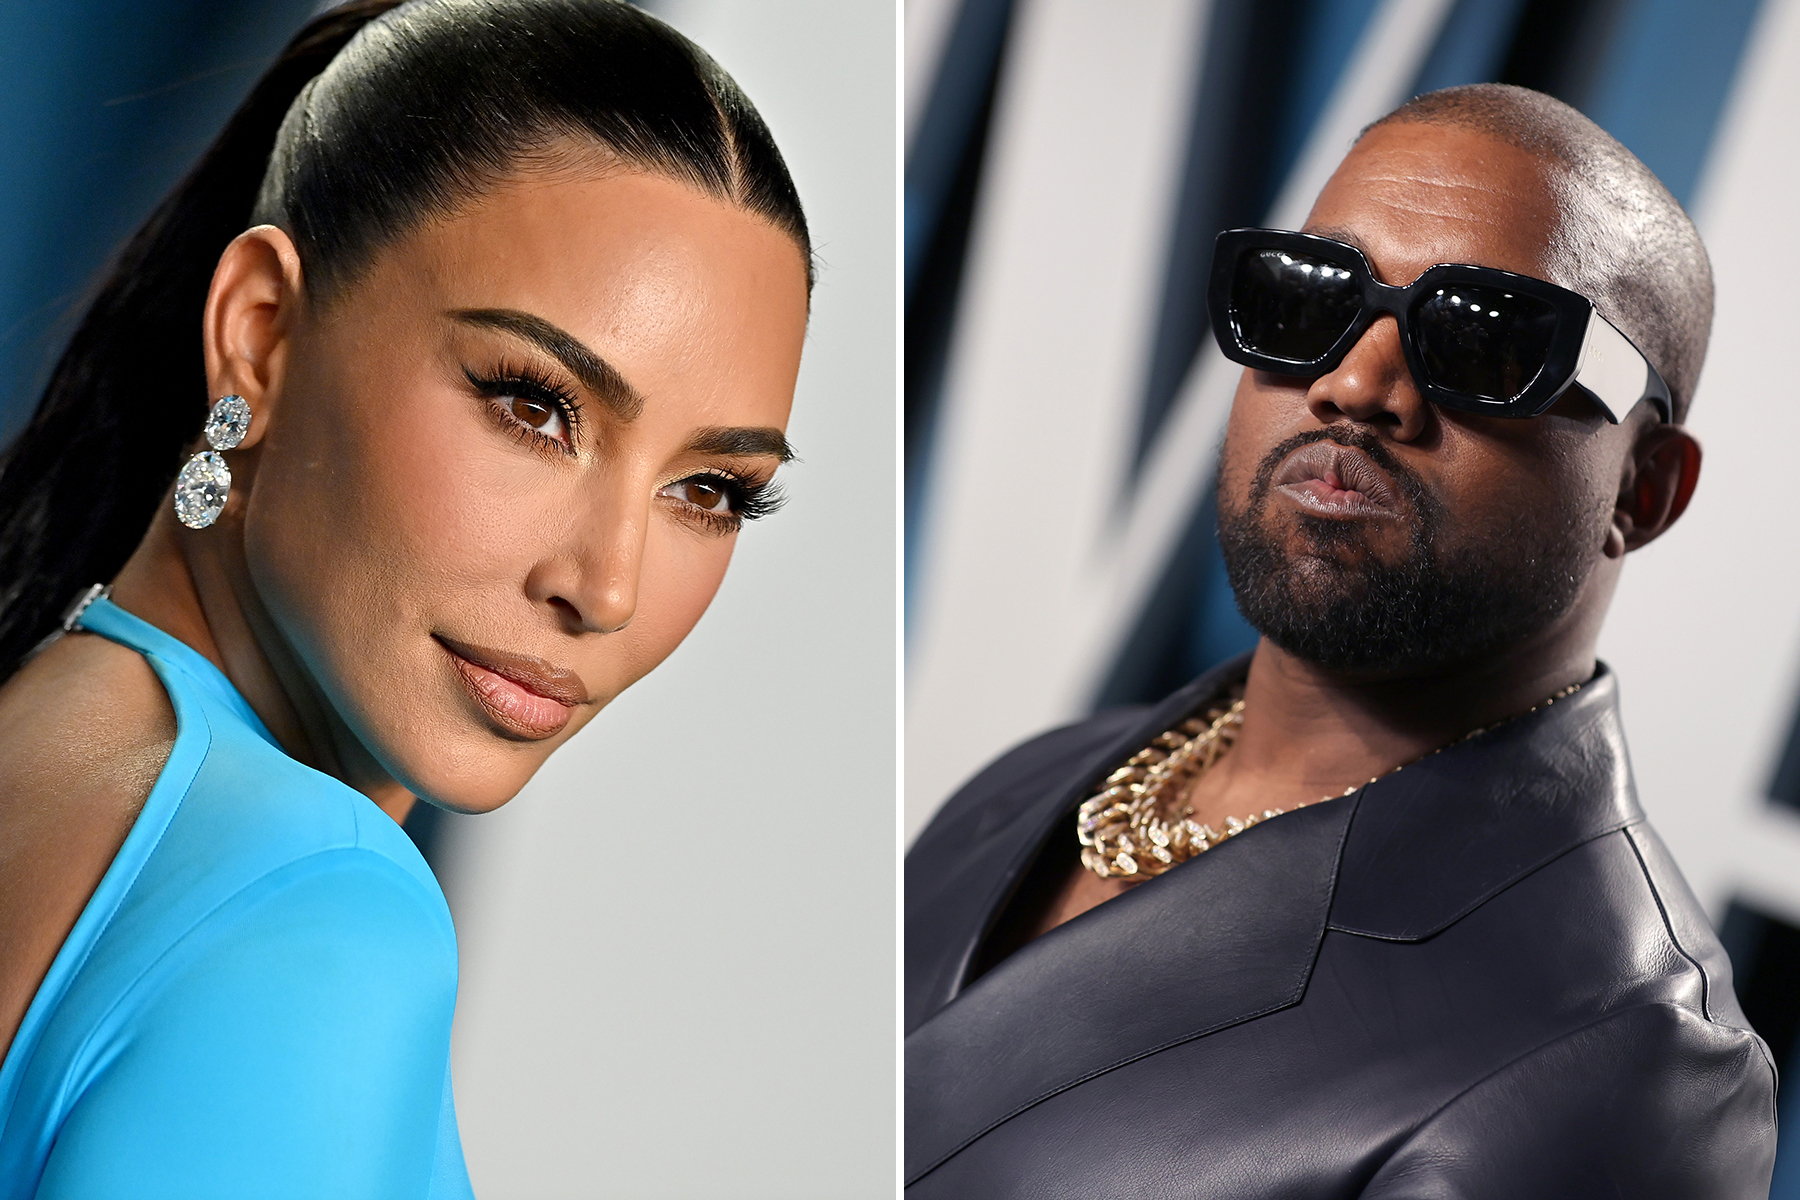 Kanye West is unable to afford a lawyer for his divorce. Kim Kardashian has a trial date